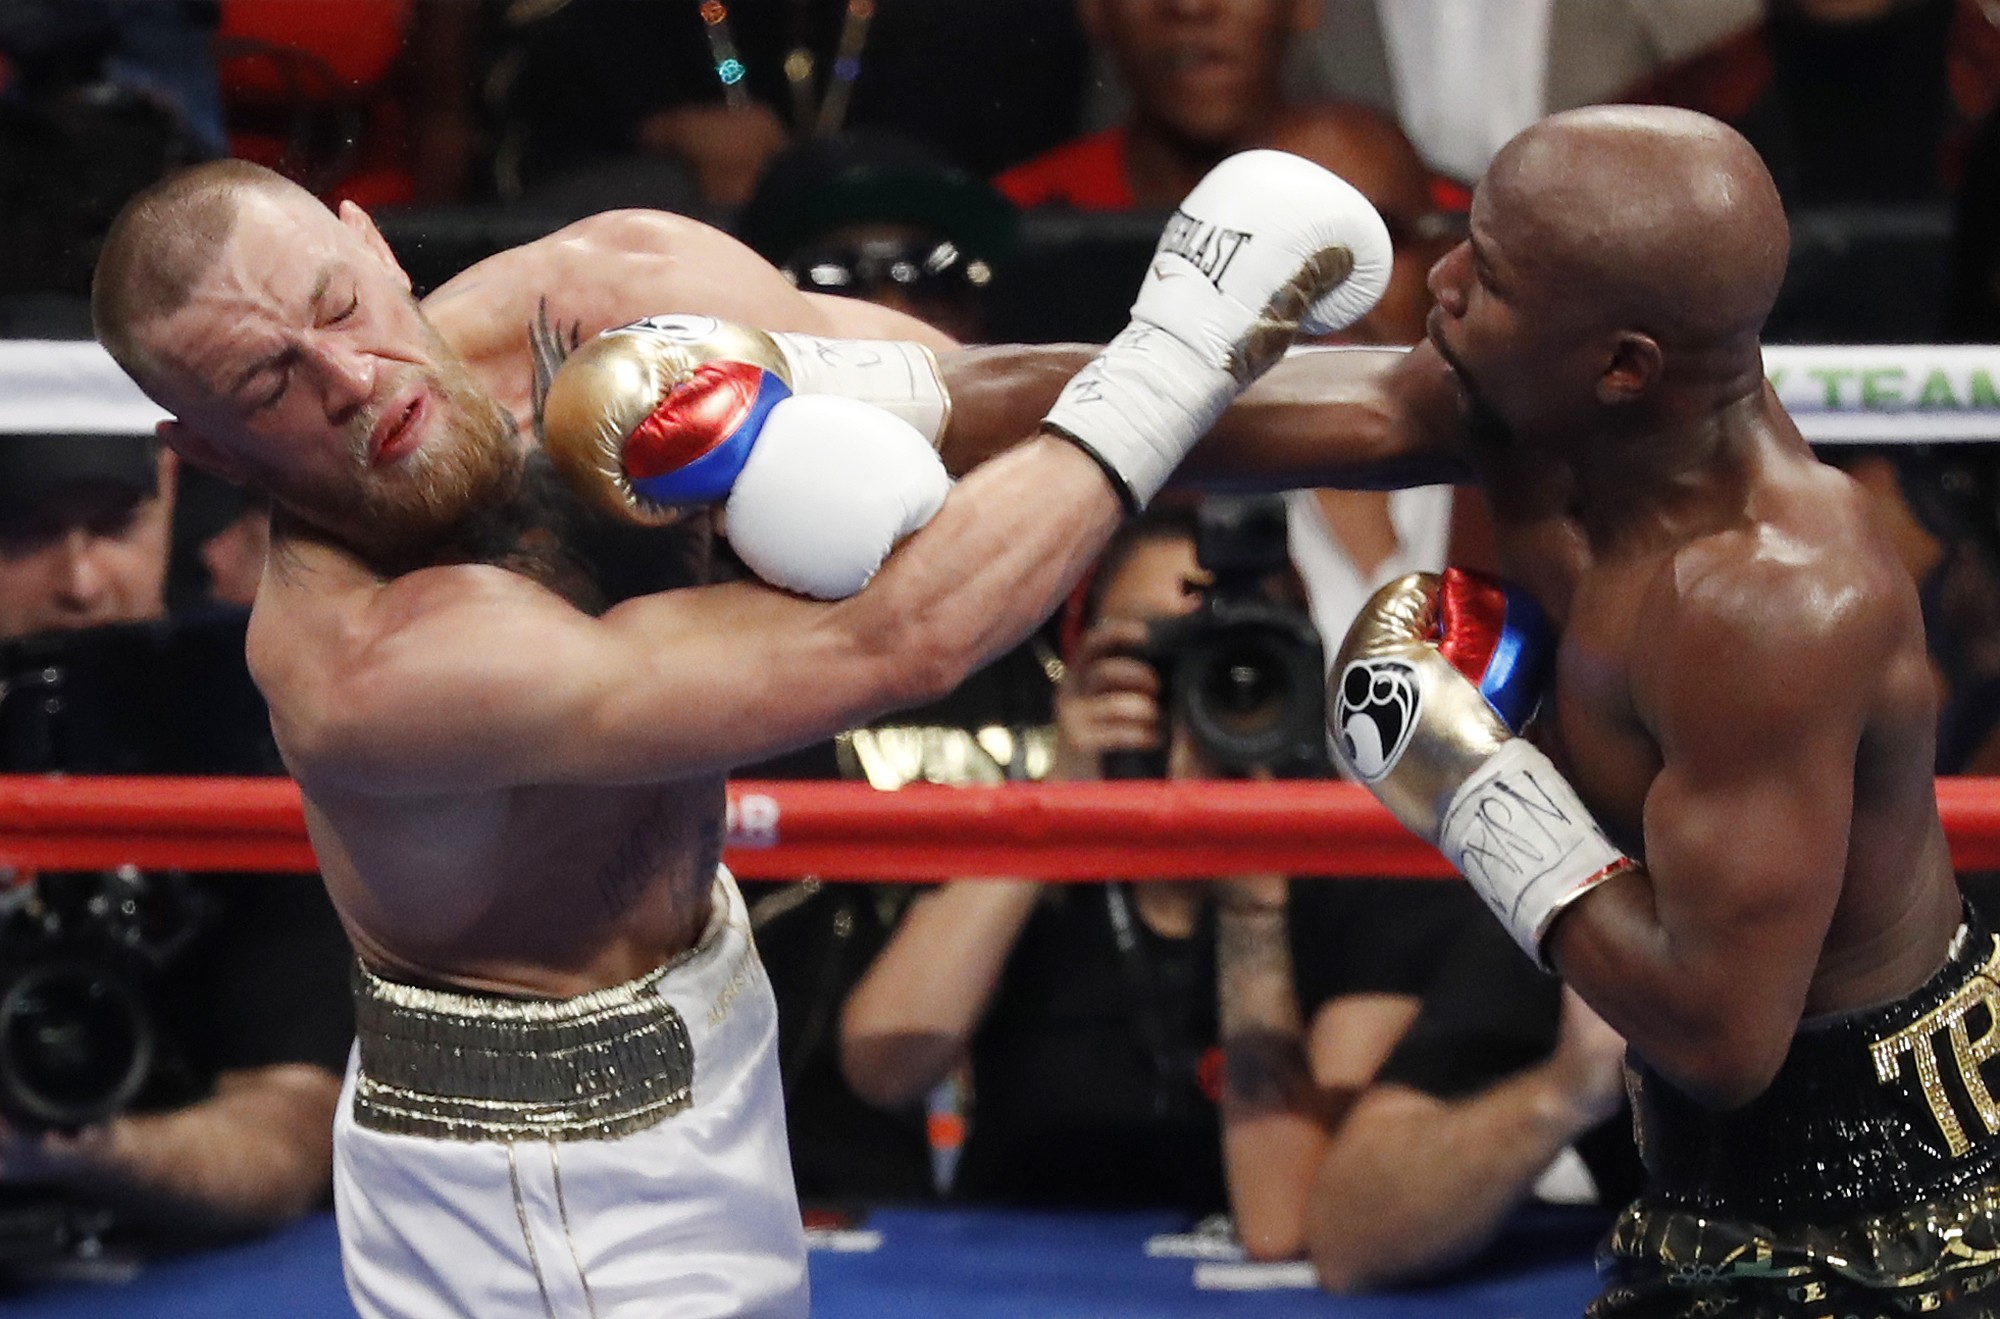 Floyd Mayweather Jnr hits Conor McGregor during their super welterweight boxing match in Las Vegas in 2017. Photo: AP